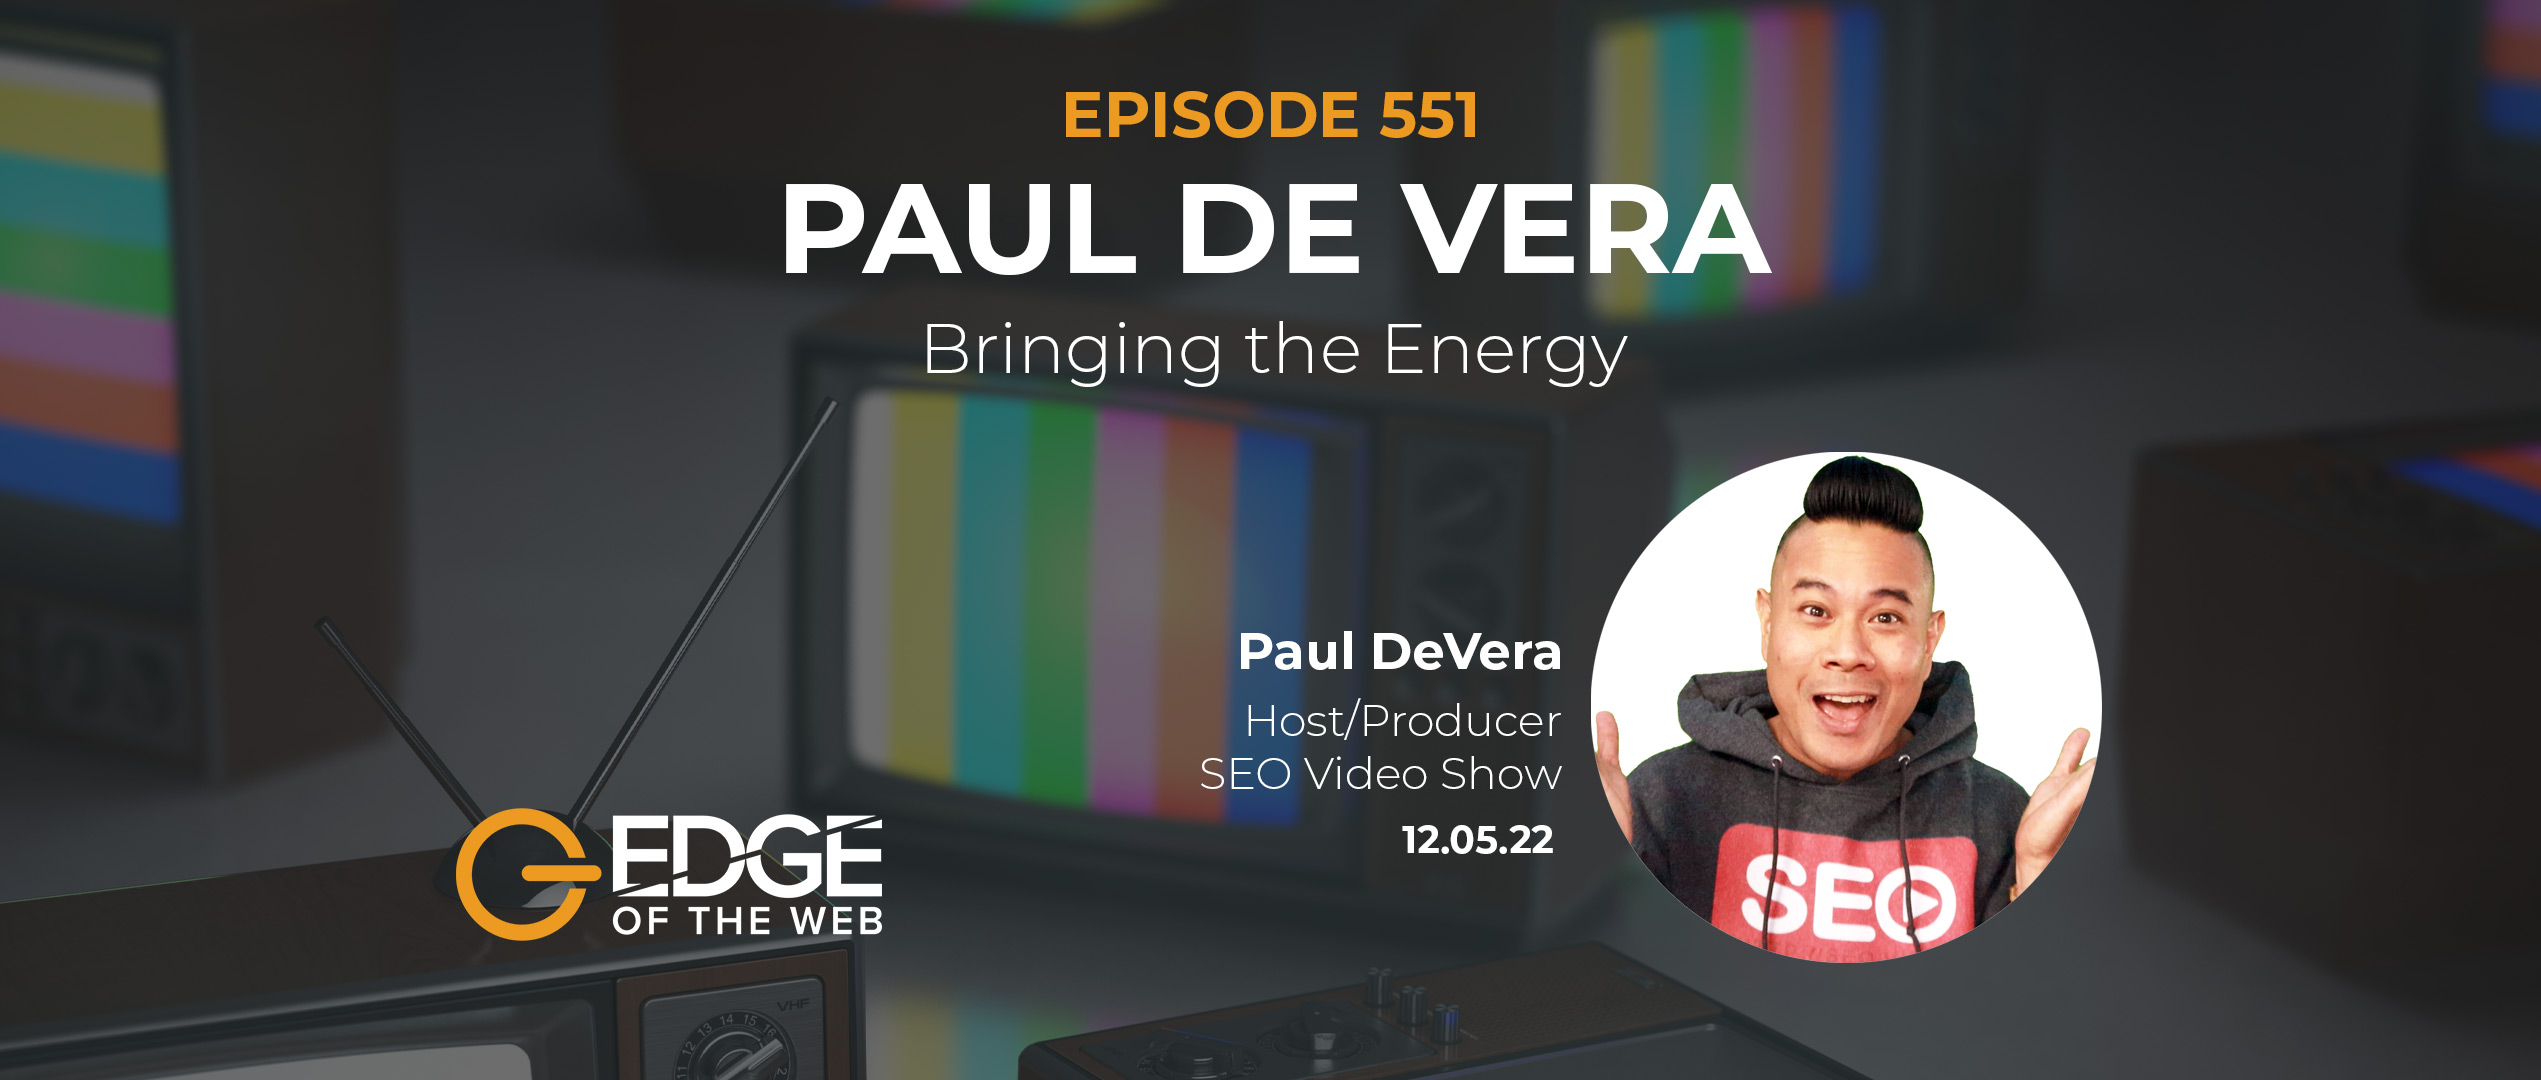 551 | Bringing the Energy w/ Paul Andre de Vera from the SEO Video Show